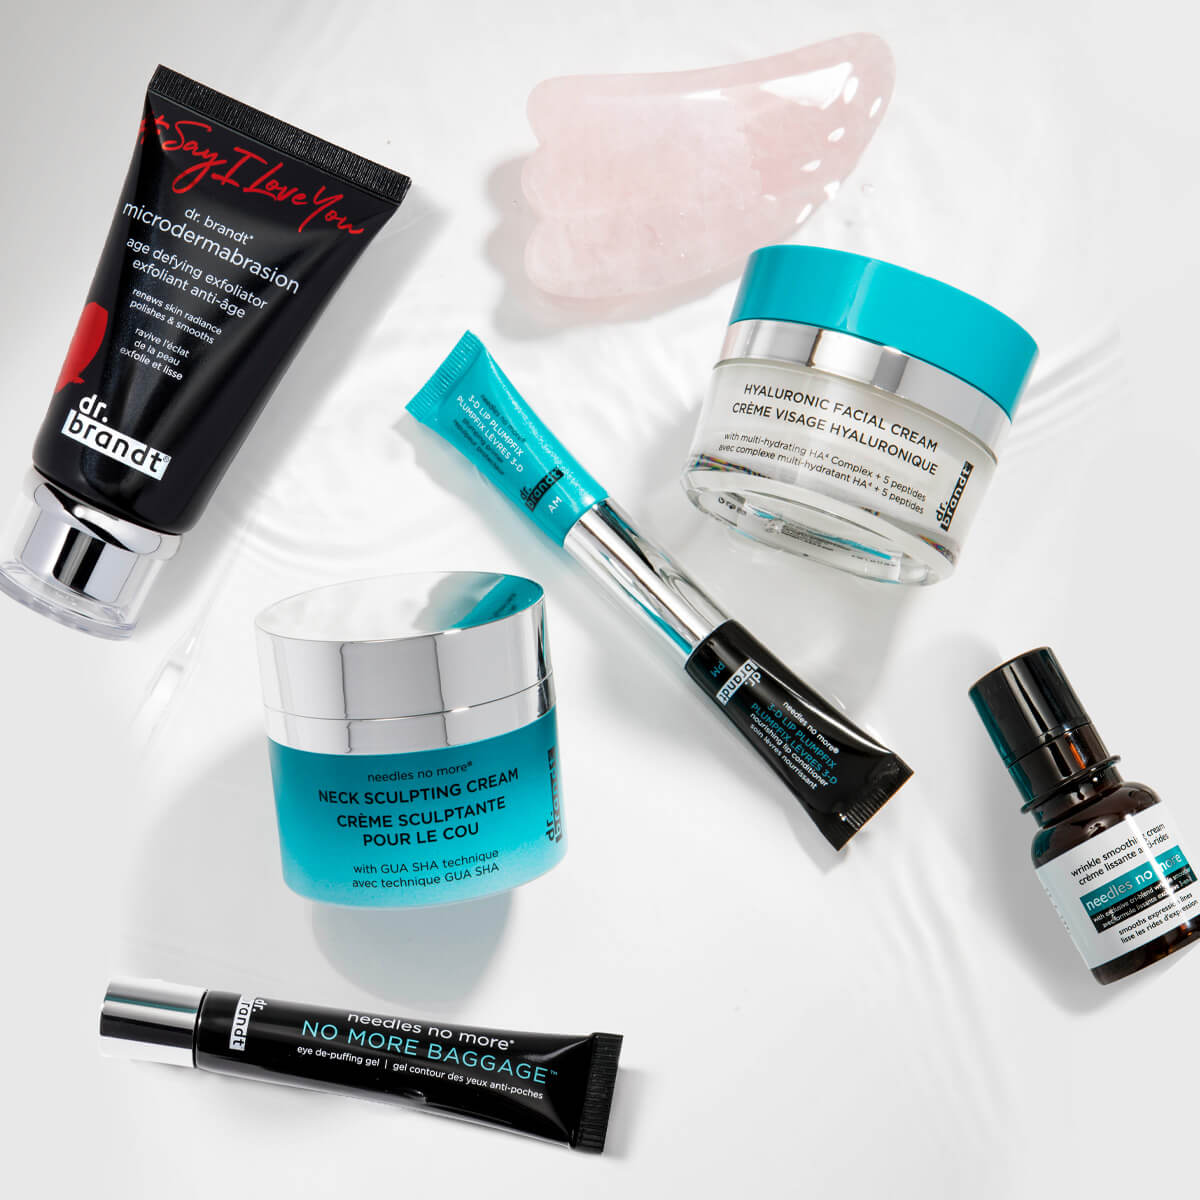 House Calls product collection.Targeted treatments use breakthrough technology combined with high efficacy ingredients to provide maximum results without downtime. shop now.